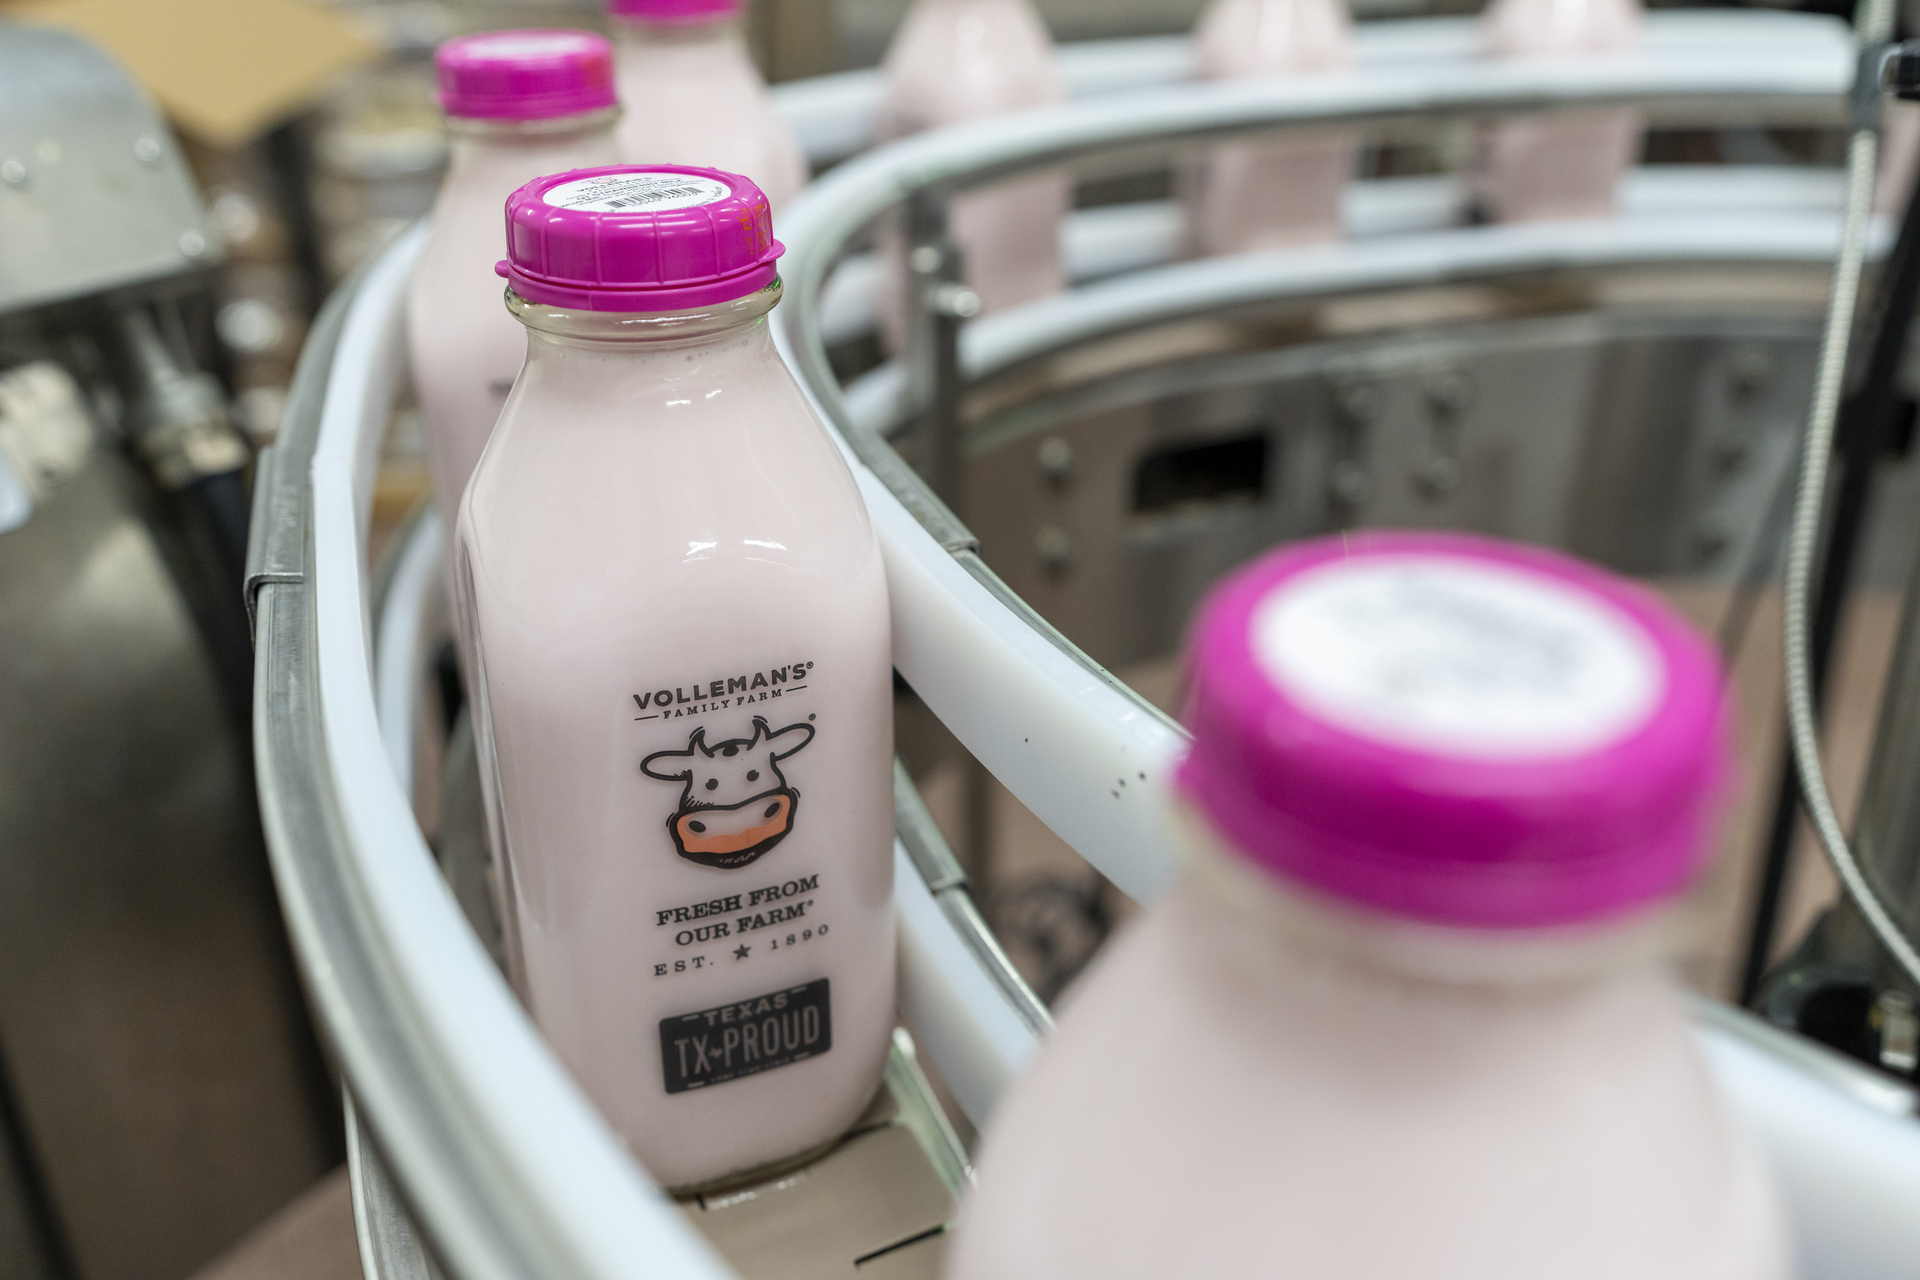 Glass bottles with strawberry milk move through the filling line at the Volleman's Family Farm bottling plant in Gustine, Texas. The bottles have the farms cow logo and pink twist tops.